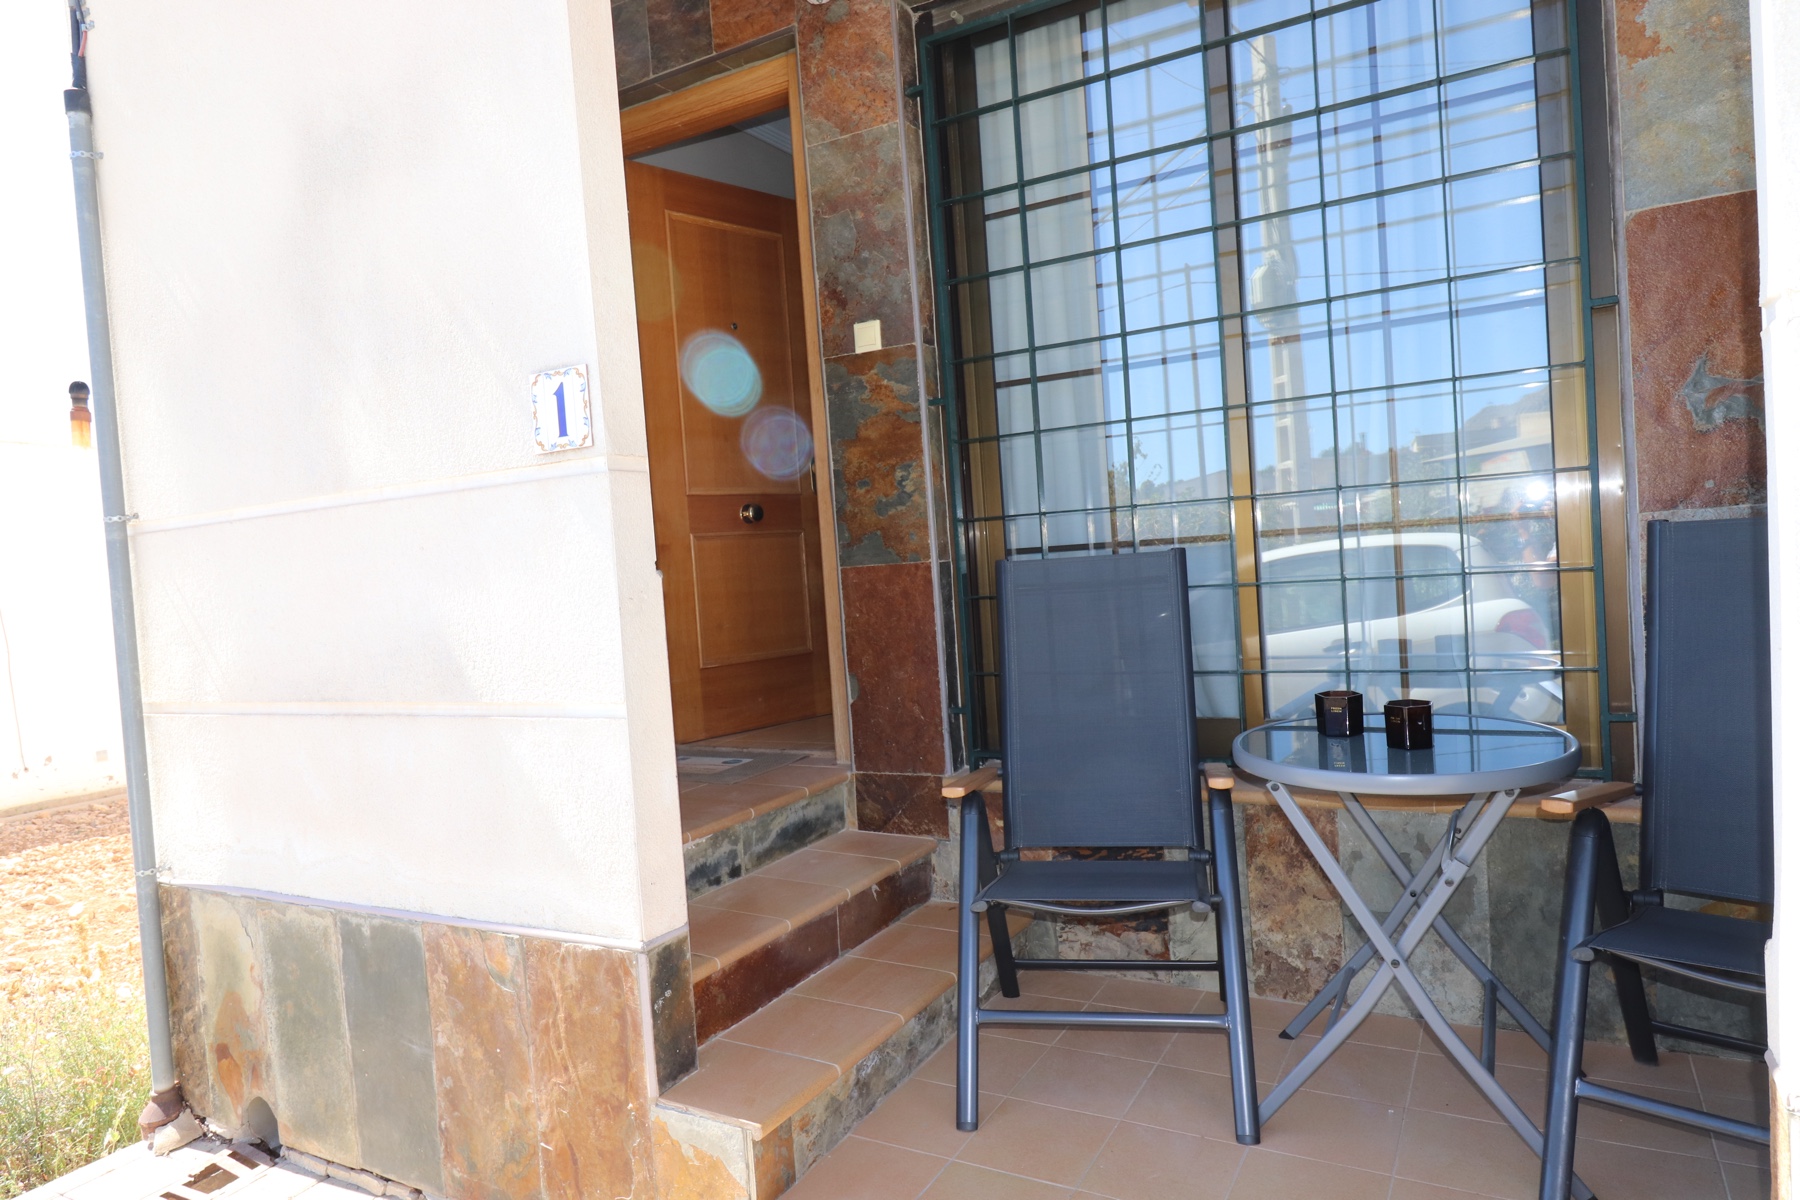 For sale: 3 bedroom apartment / flat in La Canalosa